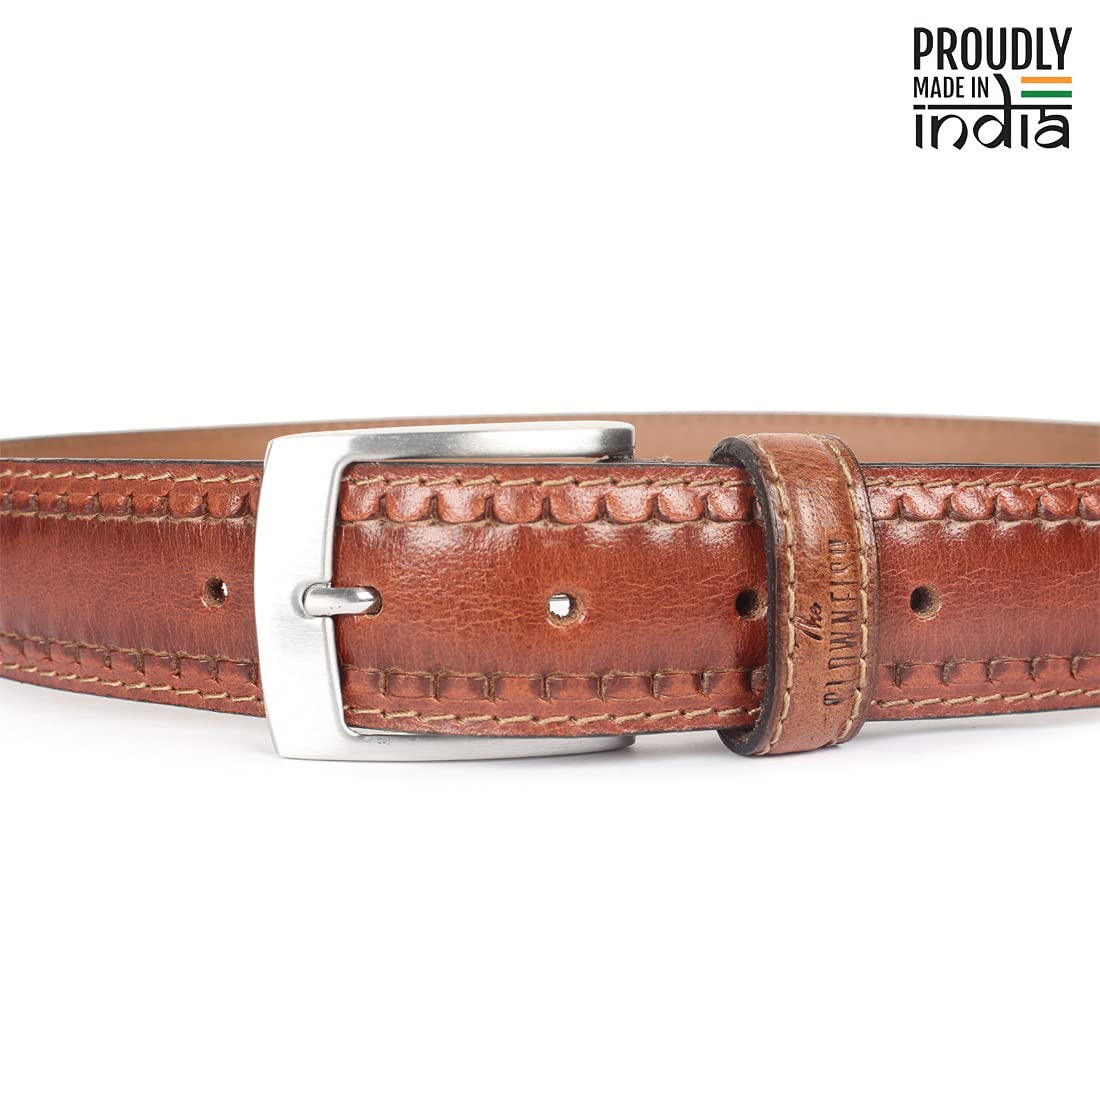 THE CLOWNFISH Men's Genuine Leather Belt with Textured/Embossed Design-Wood Brown (Size-36 inches)